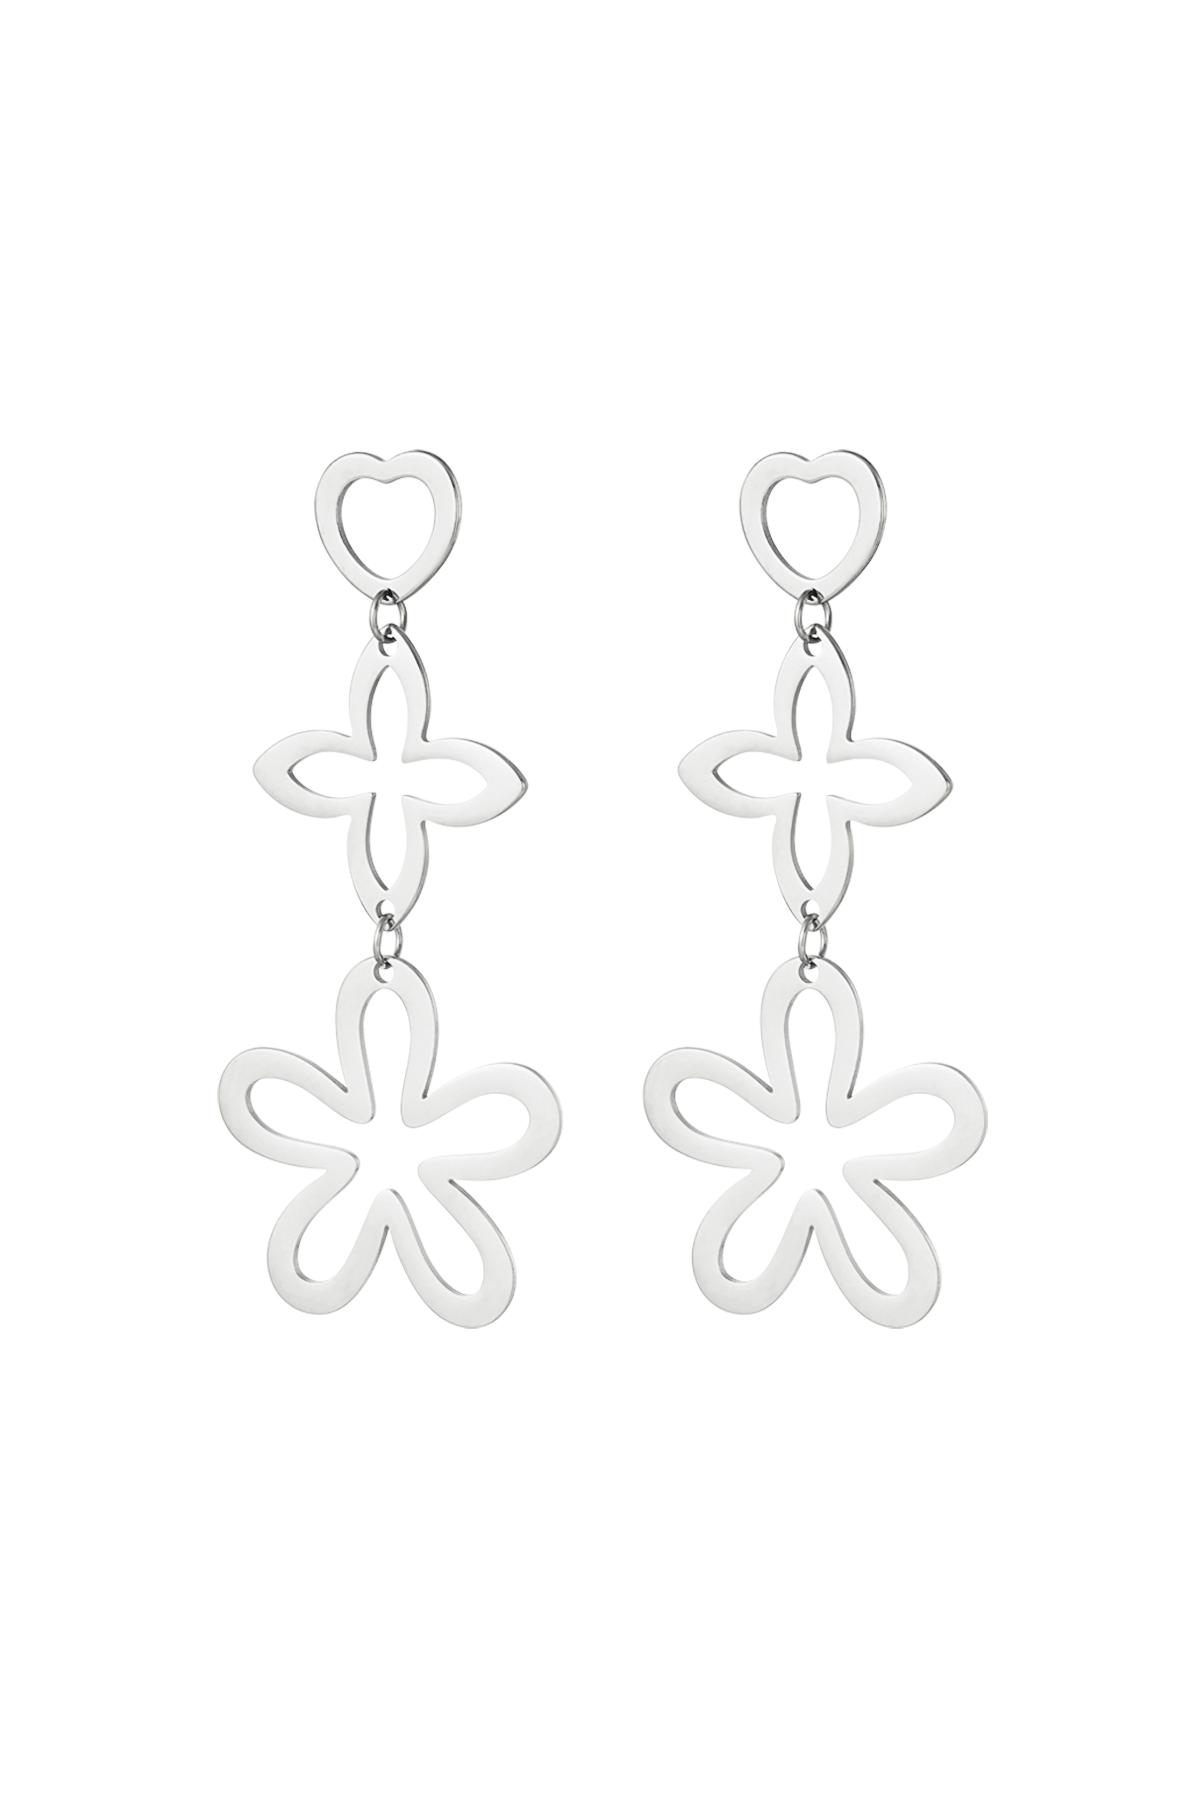 Statement earrings three charms Silver Stainless Steel 